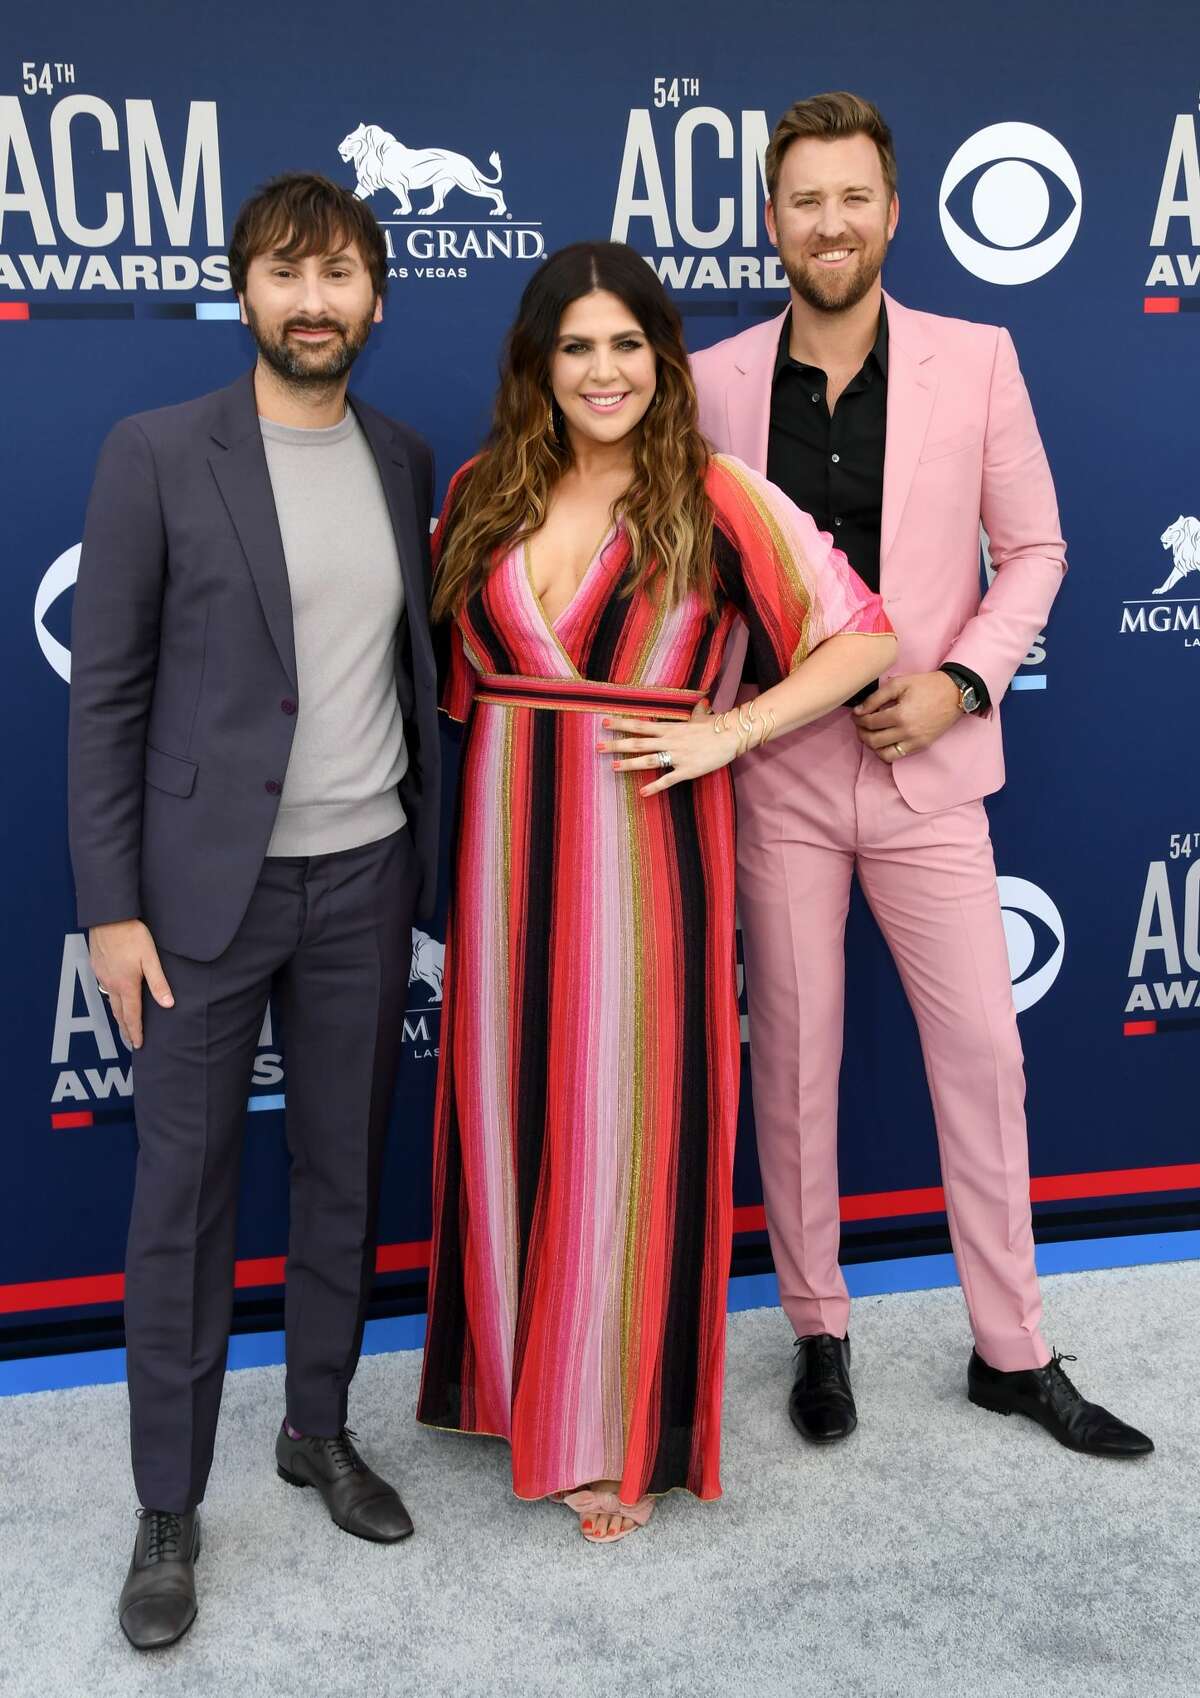 LAS VEGAS, NEVADA - APRIL 07: (L-R) Dave Haywood, Hillary Scott, and Charles Kelley of Lady Antebellum attend the 54th Academy Of Country Music Awards at MGM Grand Hotel & Casino on April 07, 2019 in Las Vegas, Nevada. (Photo by Ethan Miller/Getty Images)